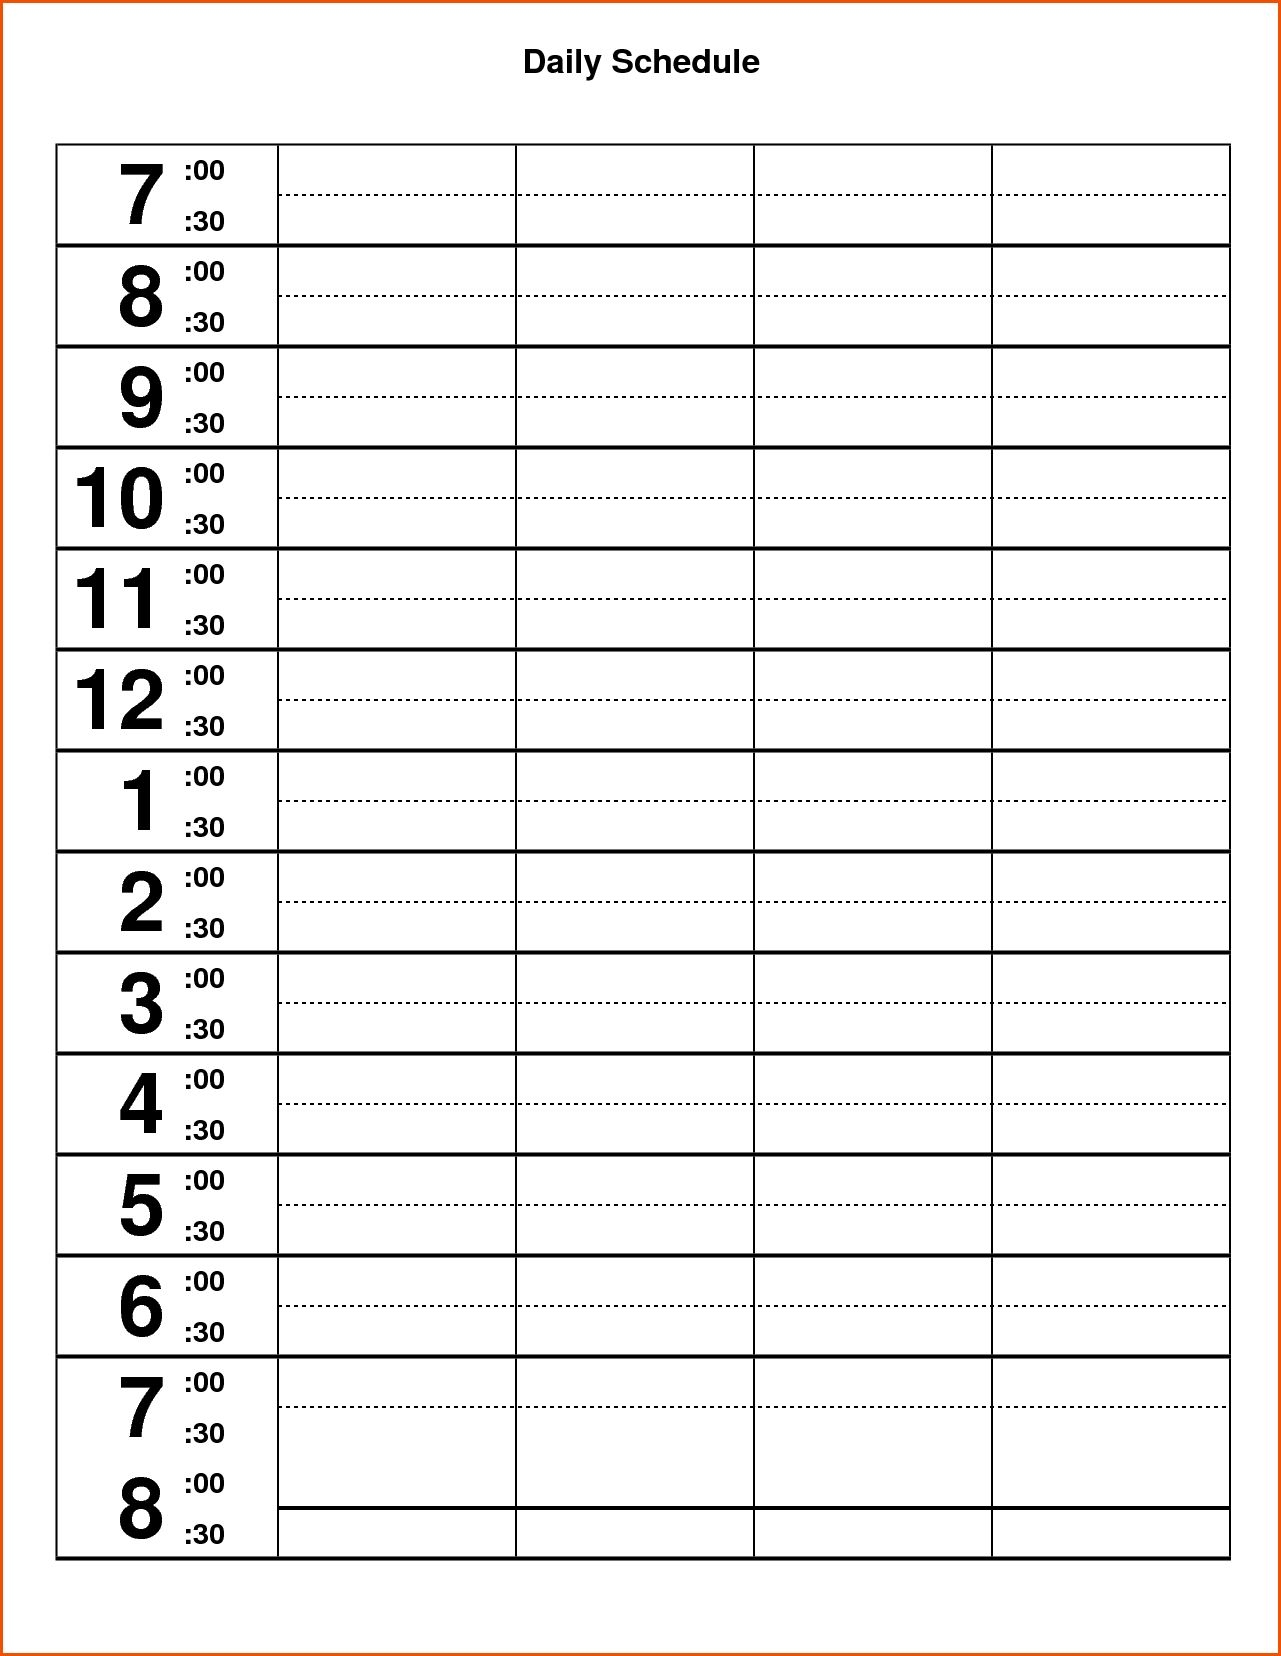 Create Your Daily Calendar With Time Slots Imaga Get Your Calendar Printable